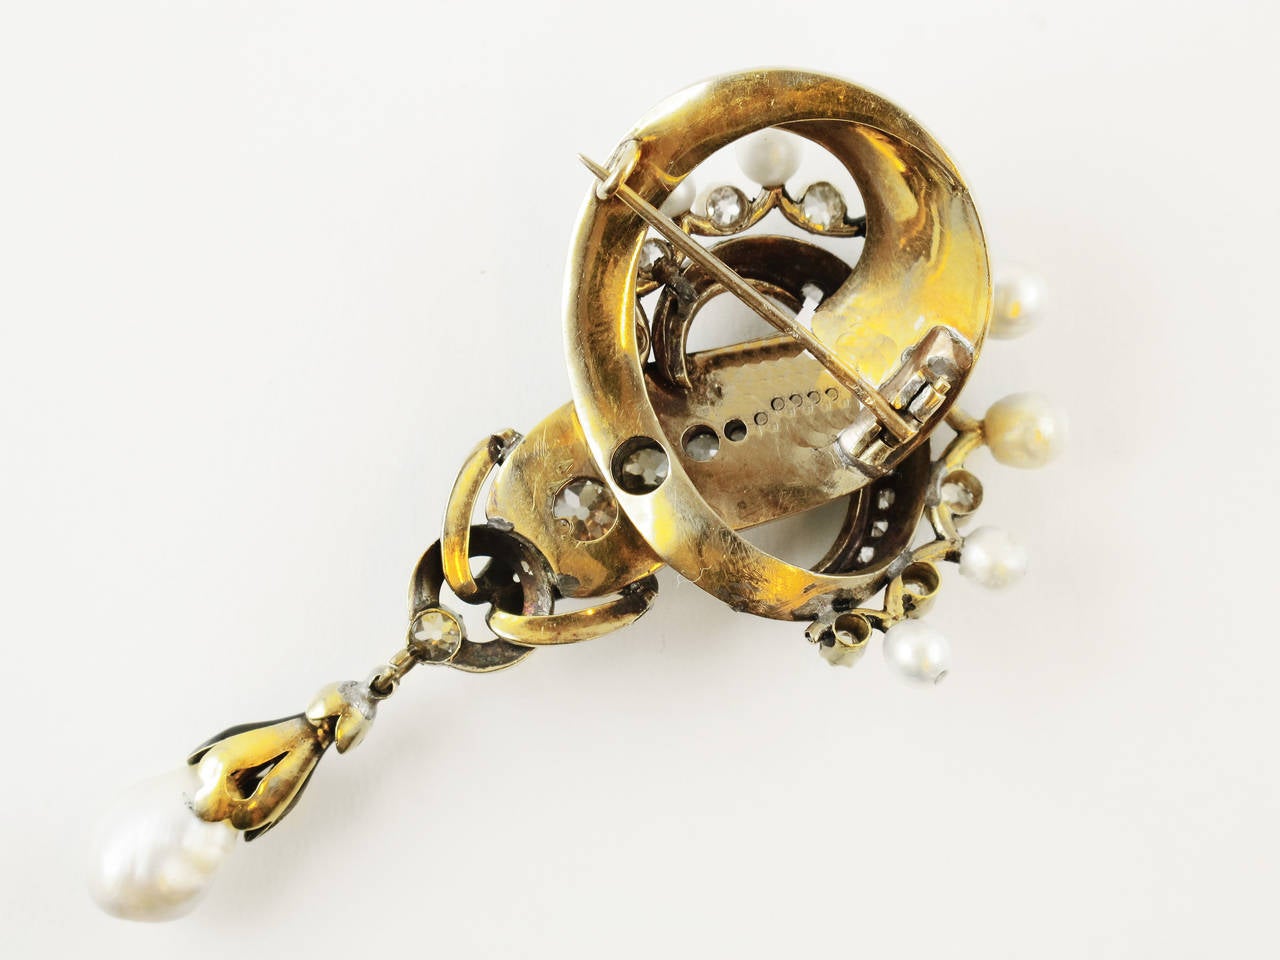 A very rare yellow gold, old-cut diamond and natural pearl brooch. Of knot design, with light blue and black enamel. The top consisting of  a Count crown made of pearl and diamond. French Hallmark, 18 kt gold. Chaumet Hallmark. 1870 c.a. The drawing